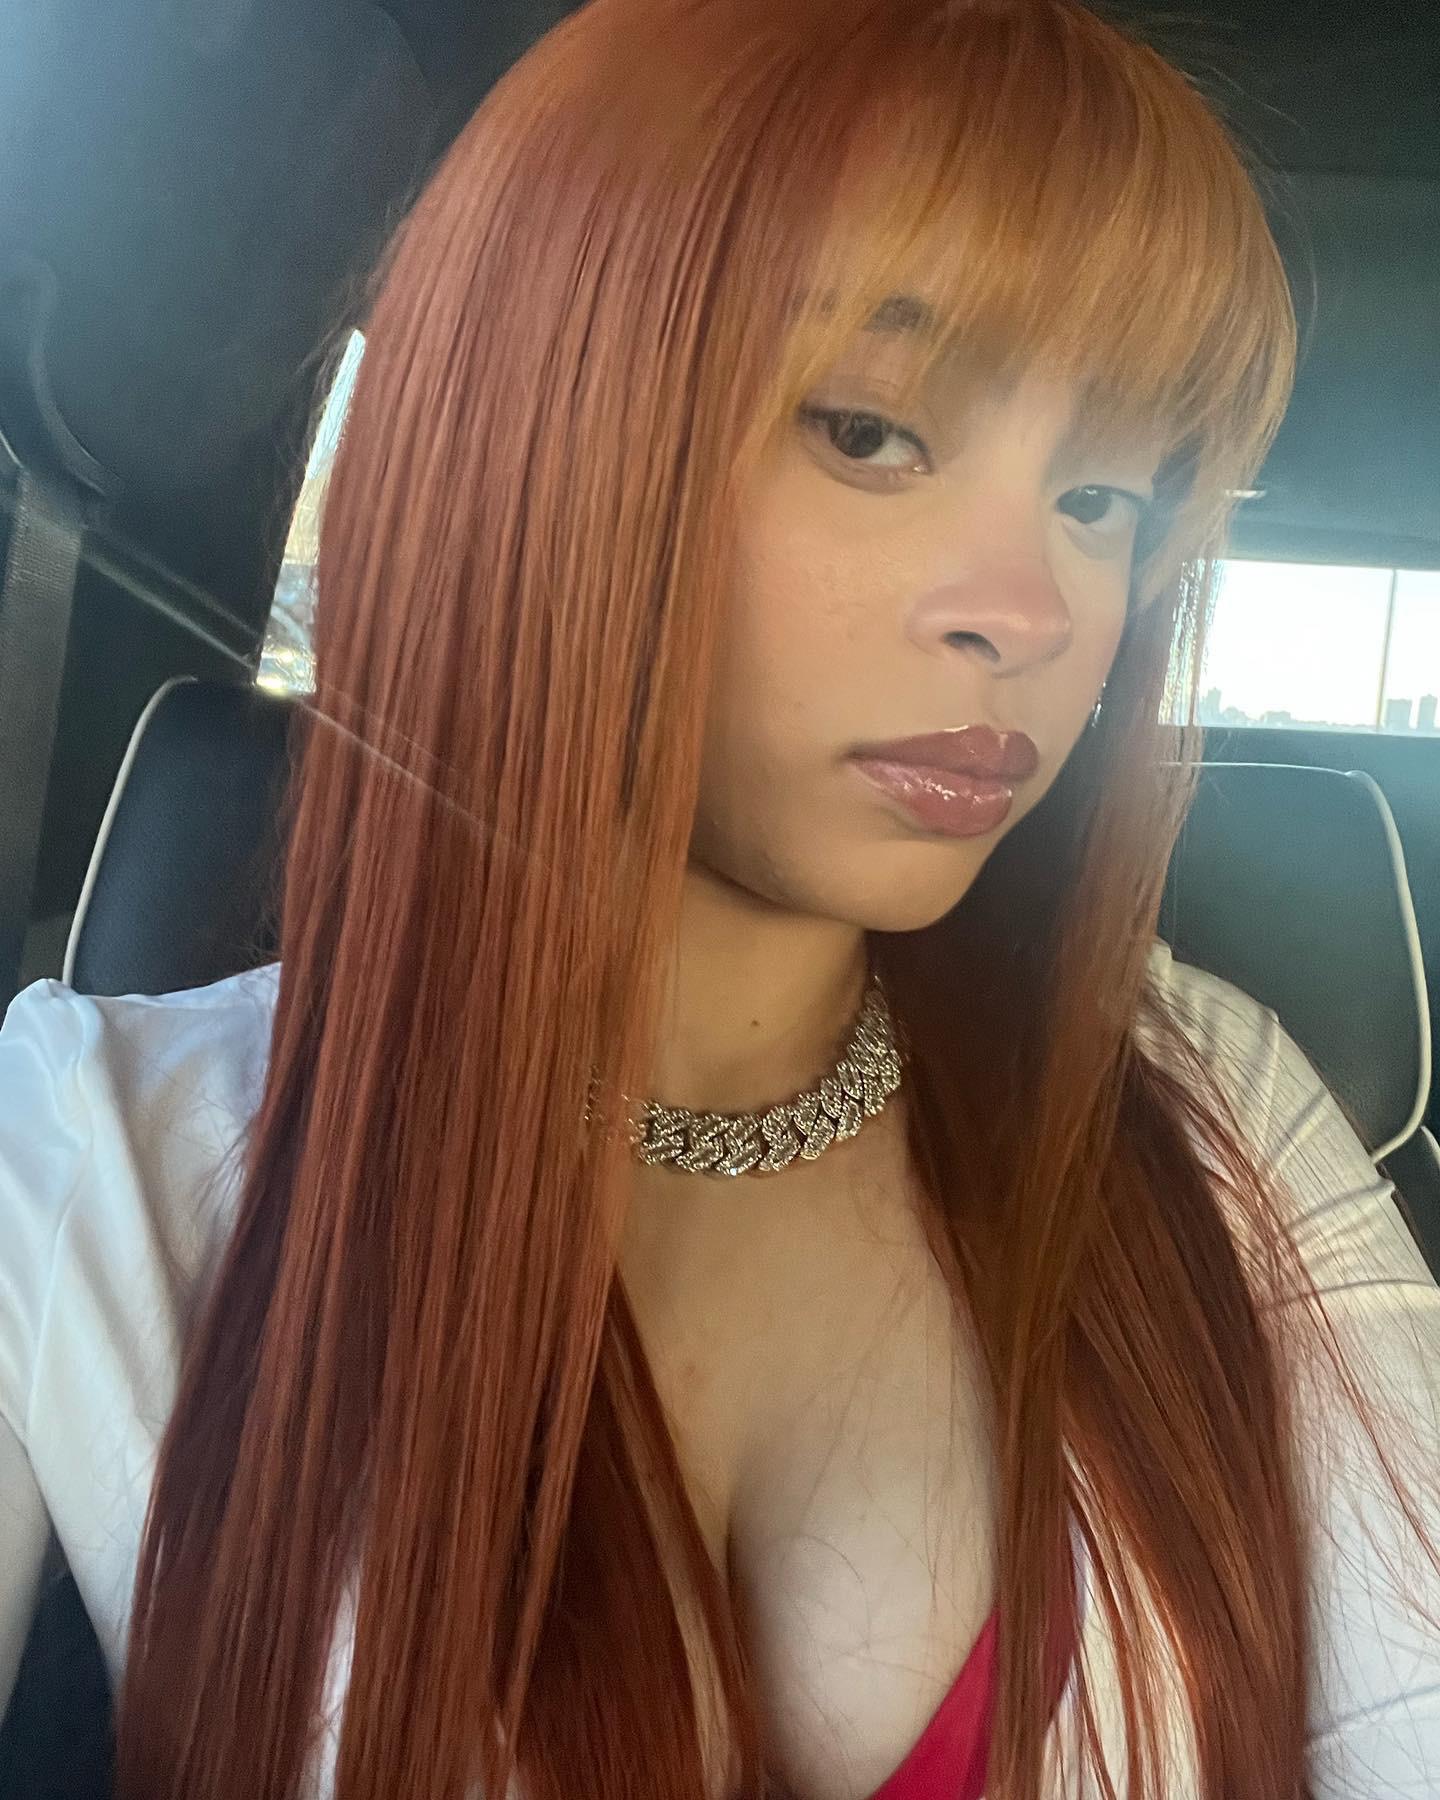 Ice Spice debuts her new hairstyle via Instagram